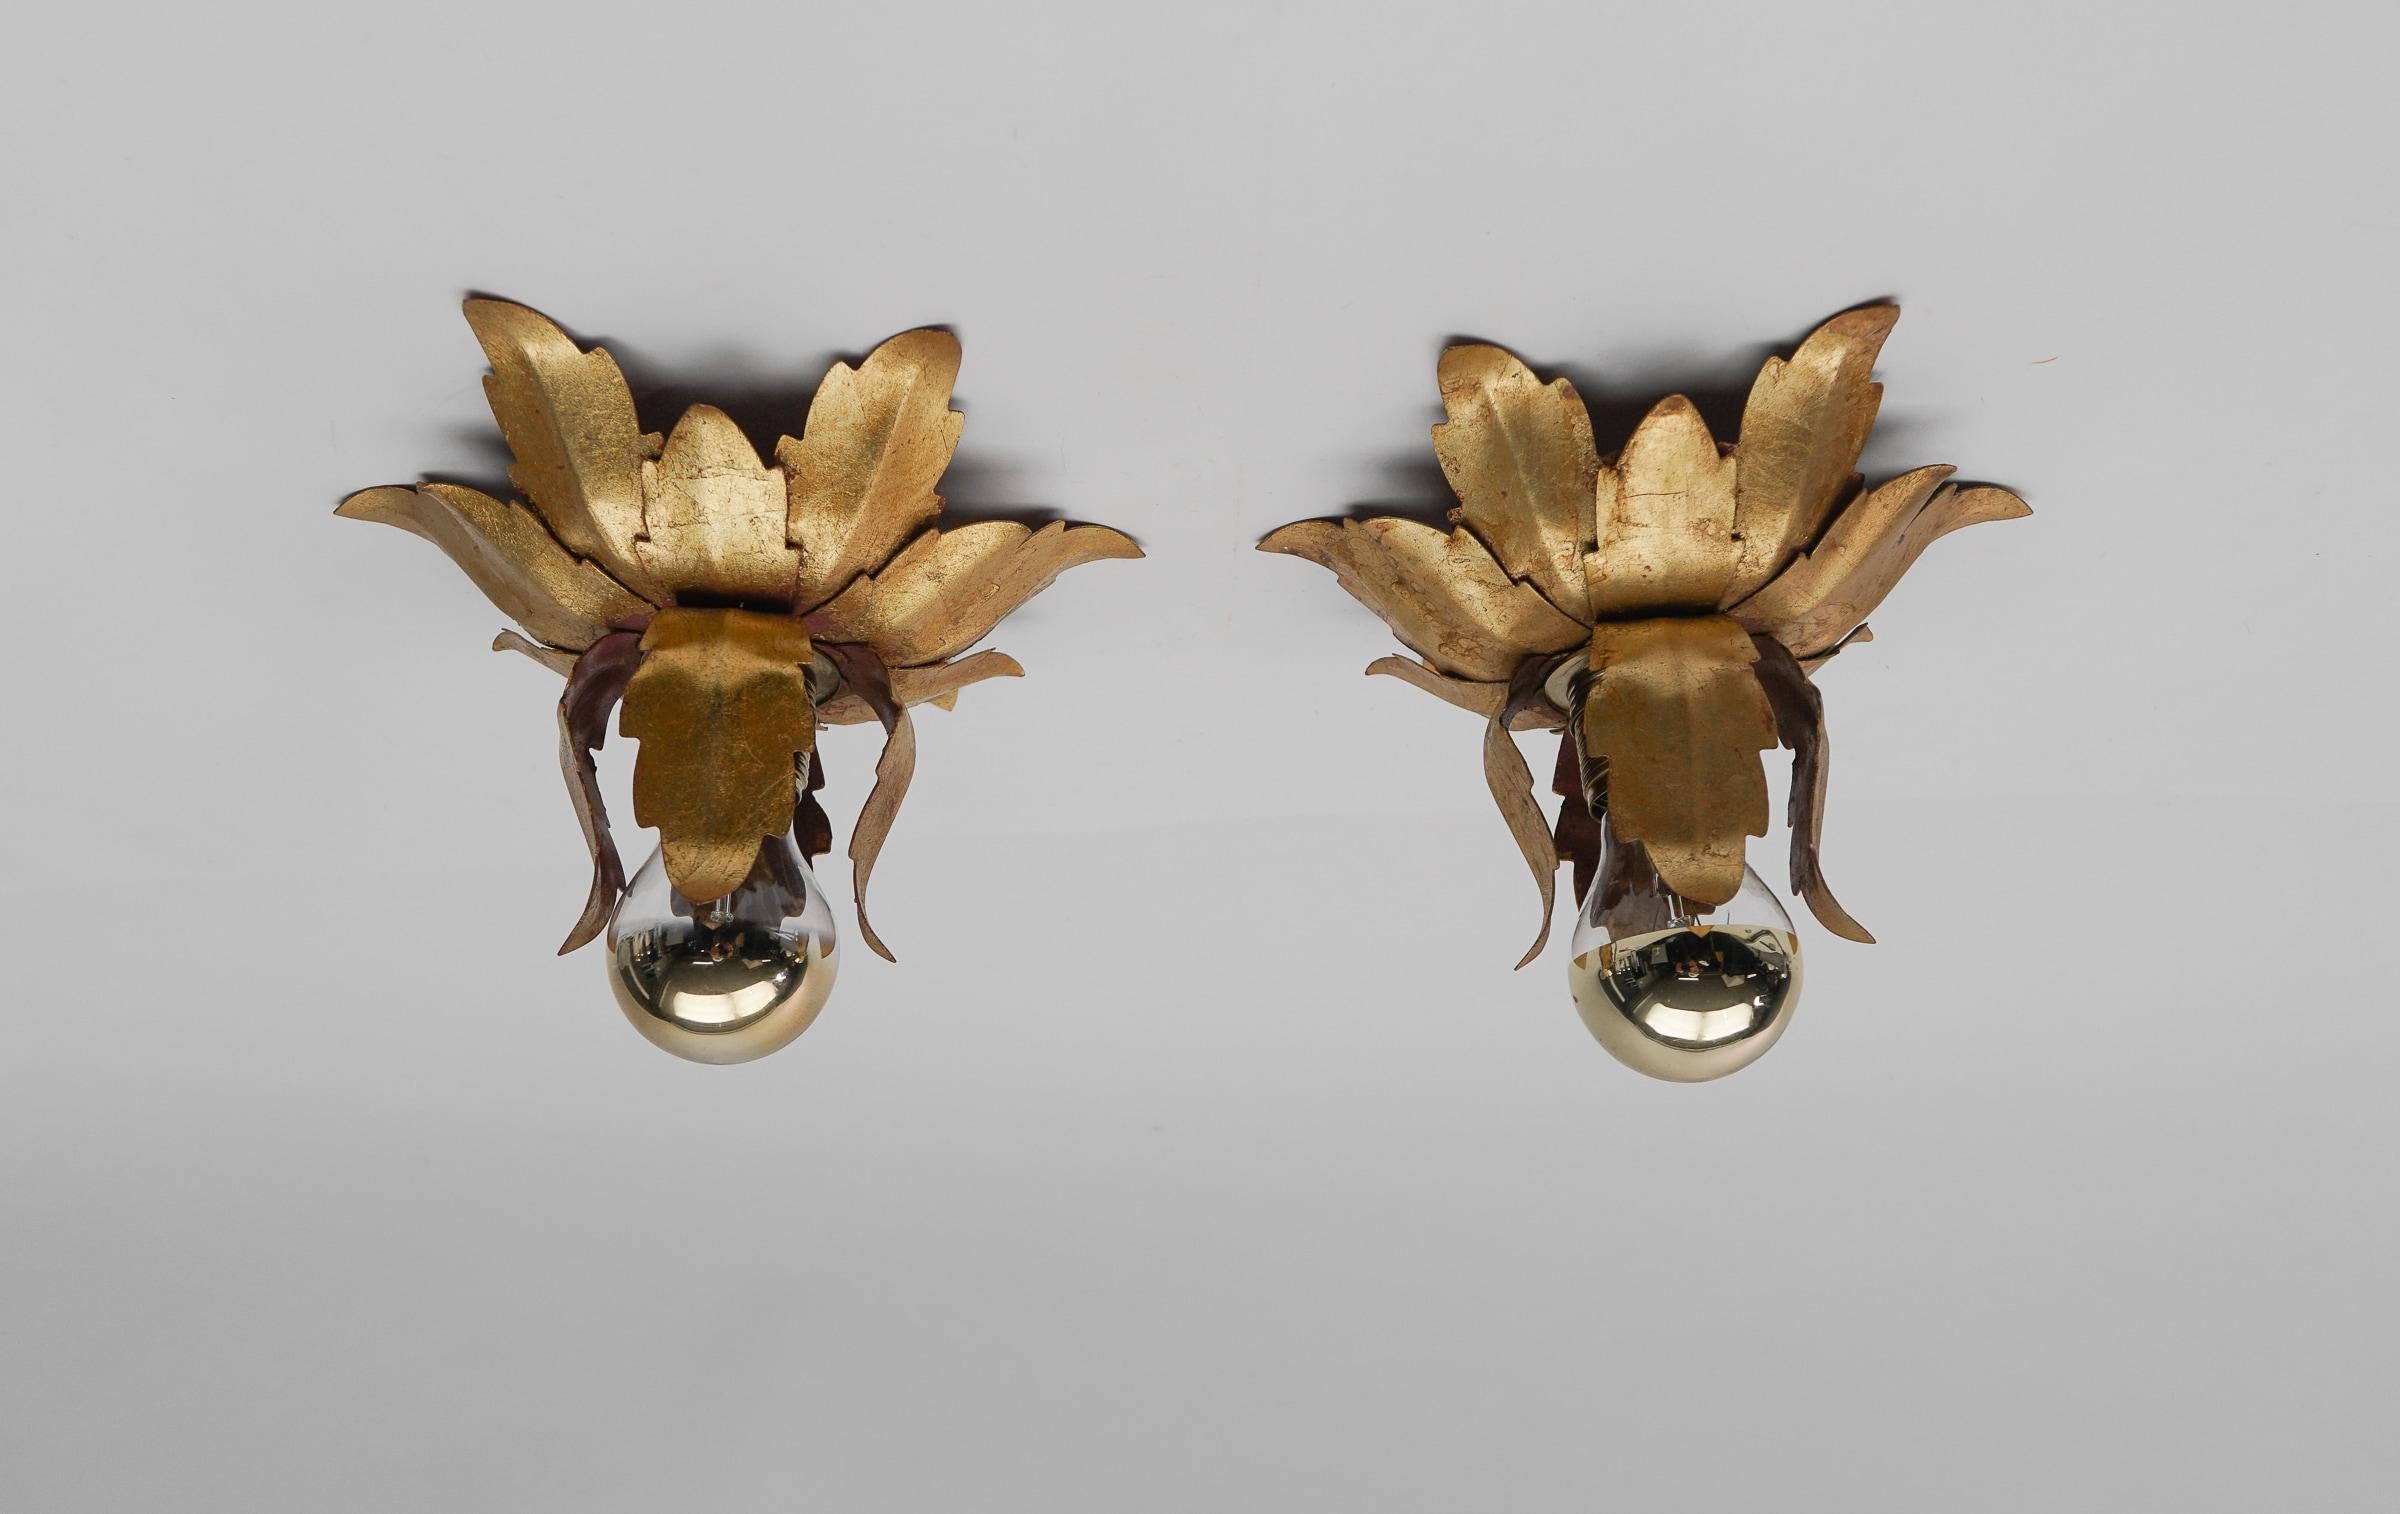 Italian Pair of Petit Hollywood Regency Gilt Lamps, 1960s Italy For Sale